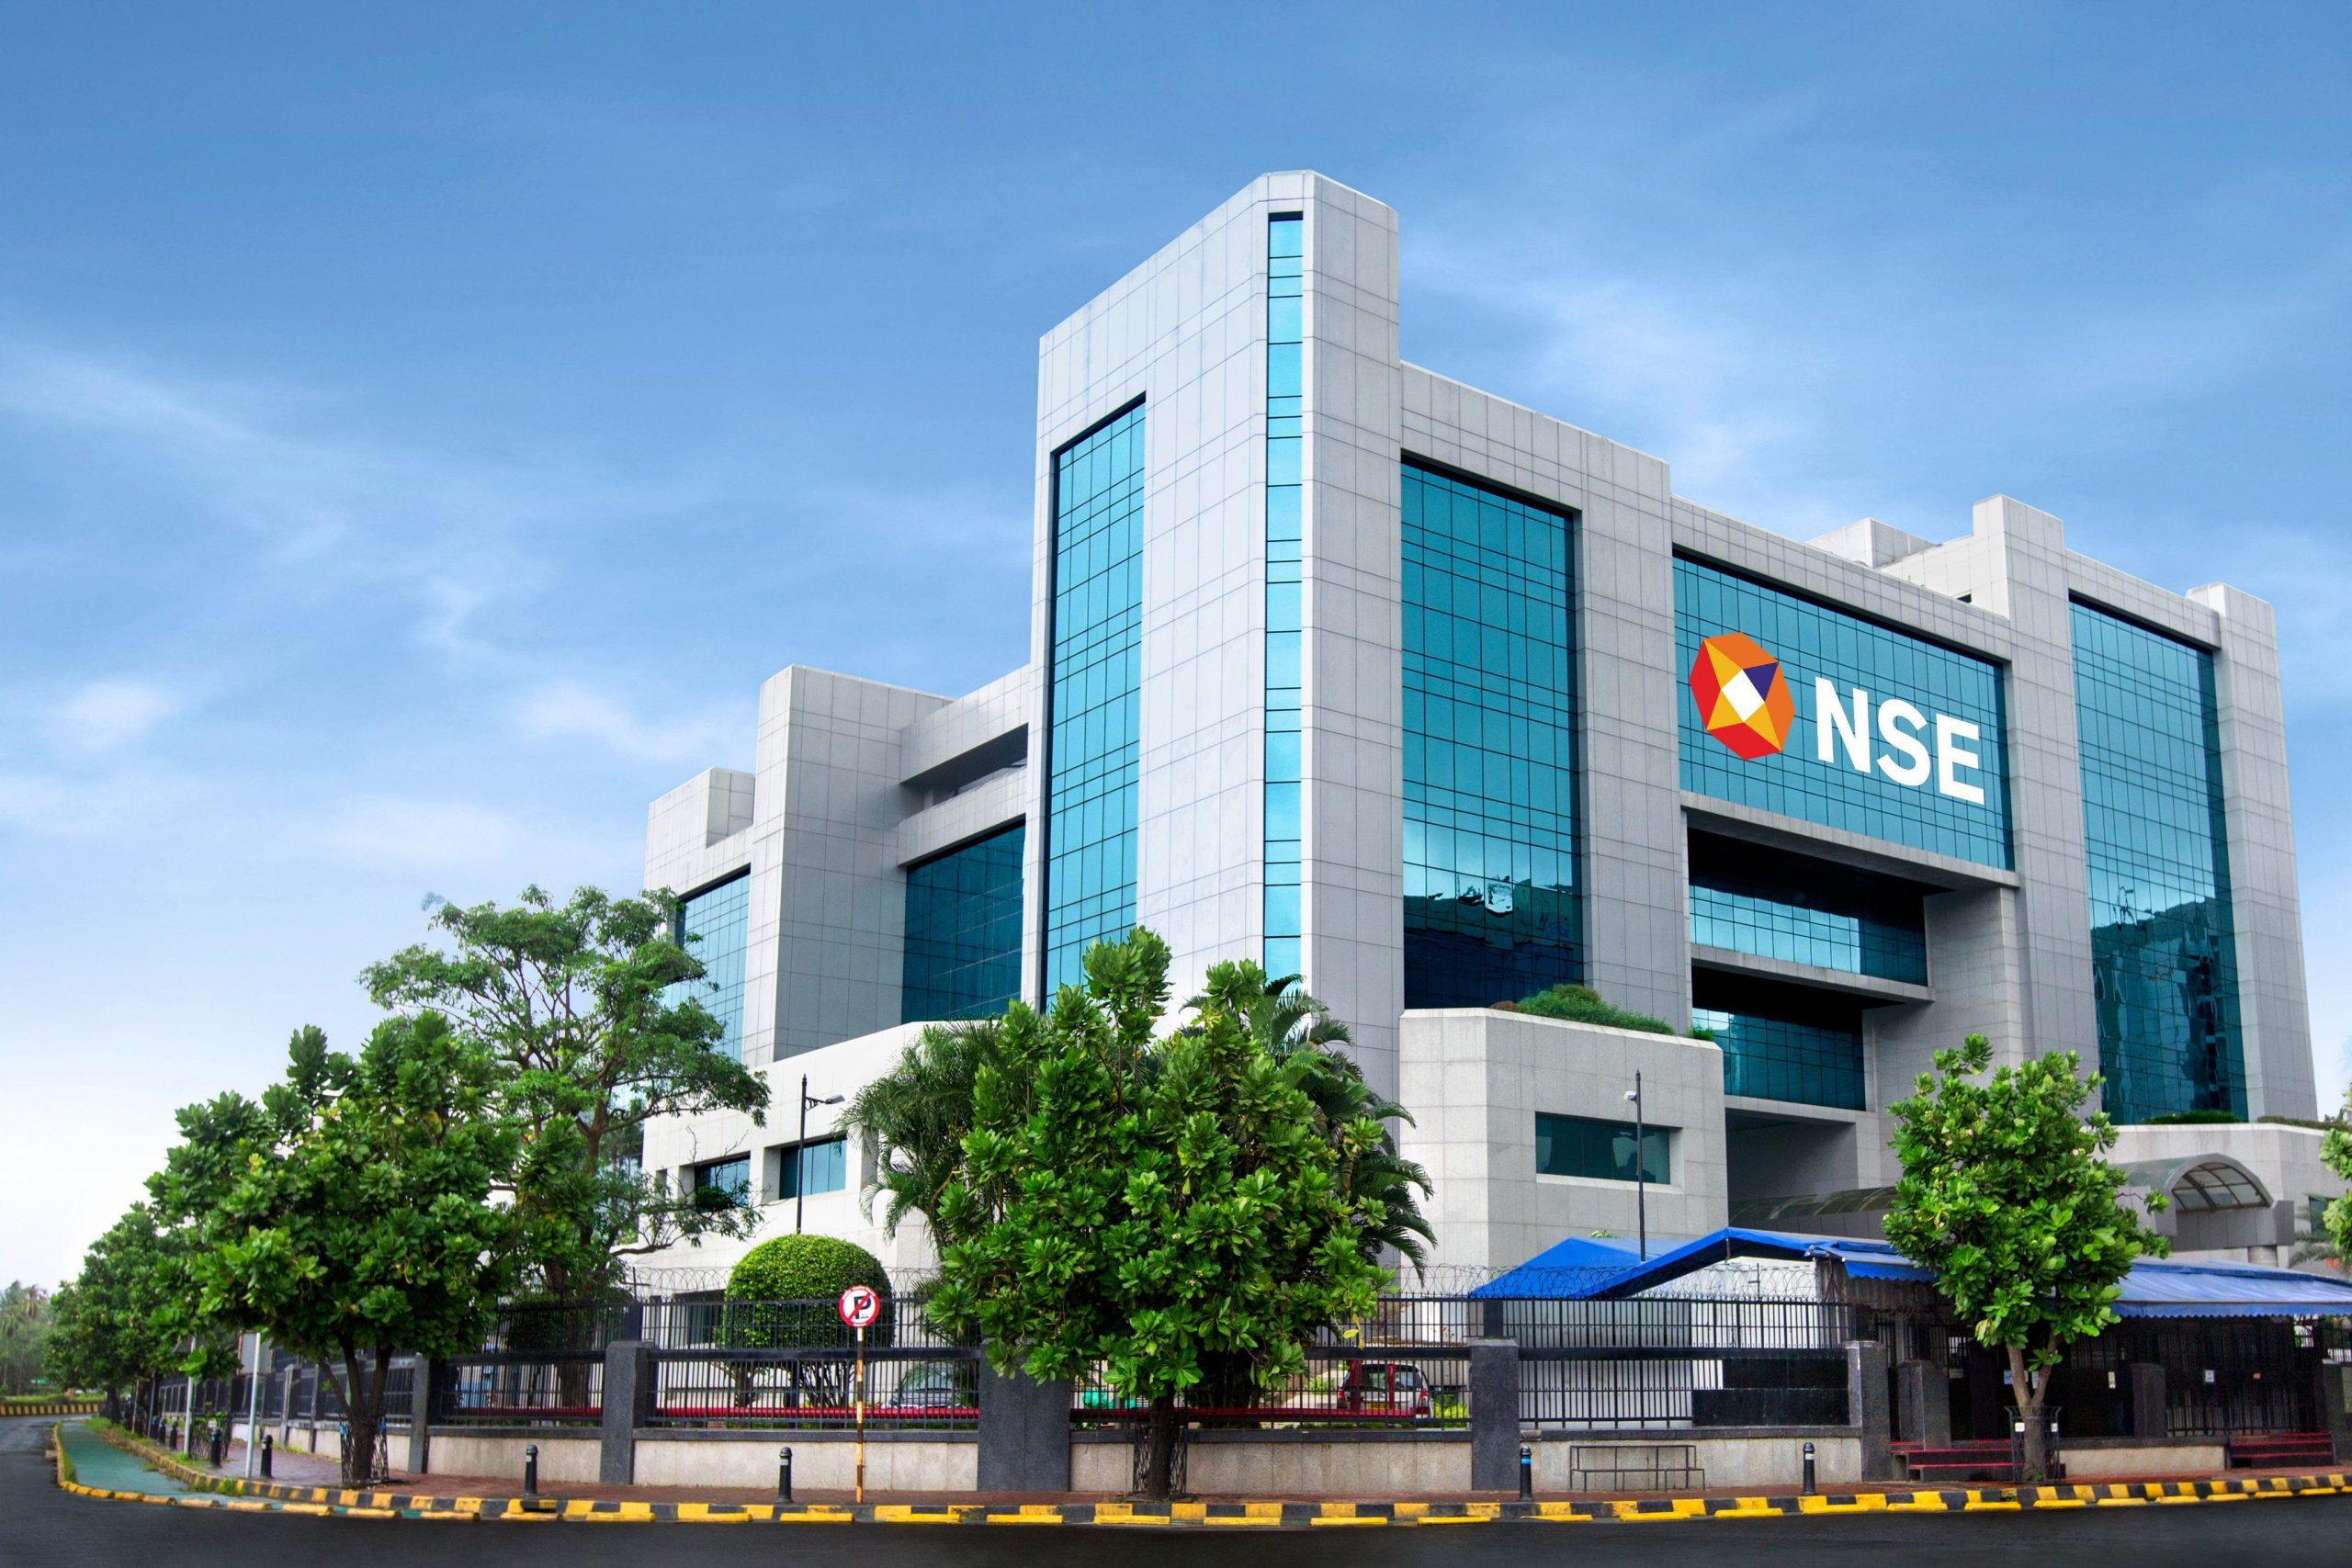 NSE F&O Ban: No stock or security has been put under ban today